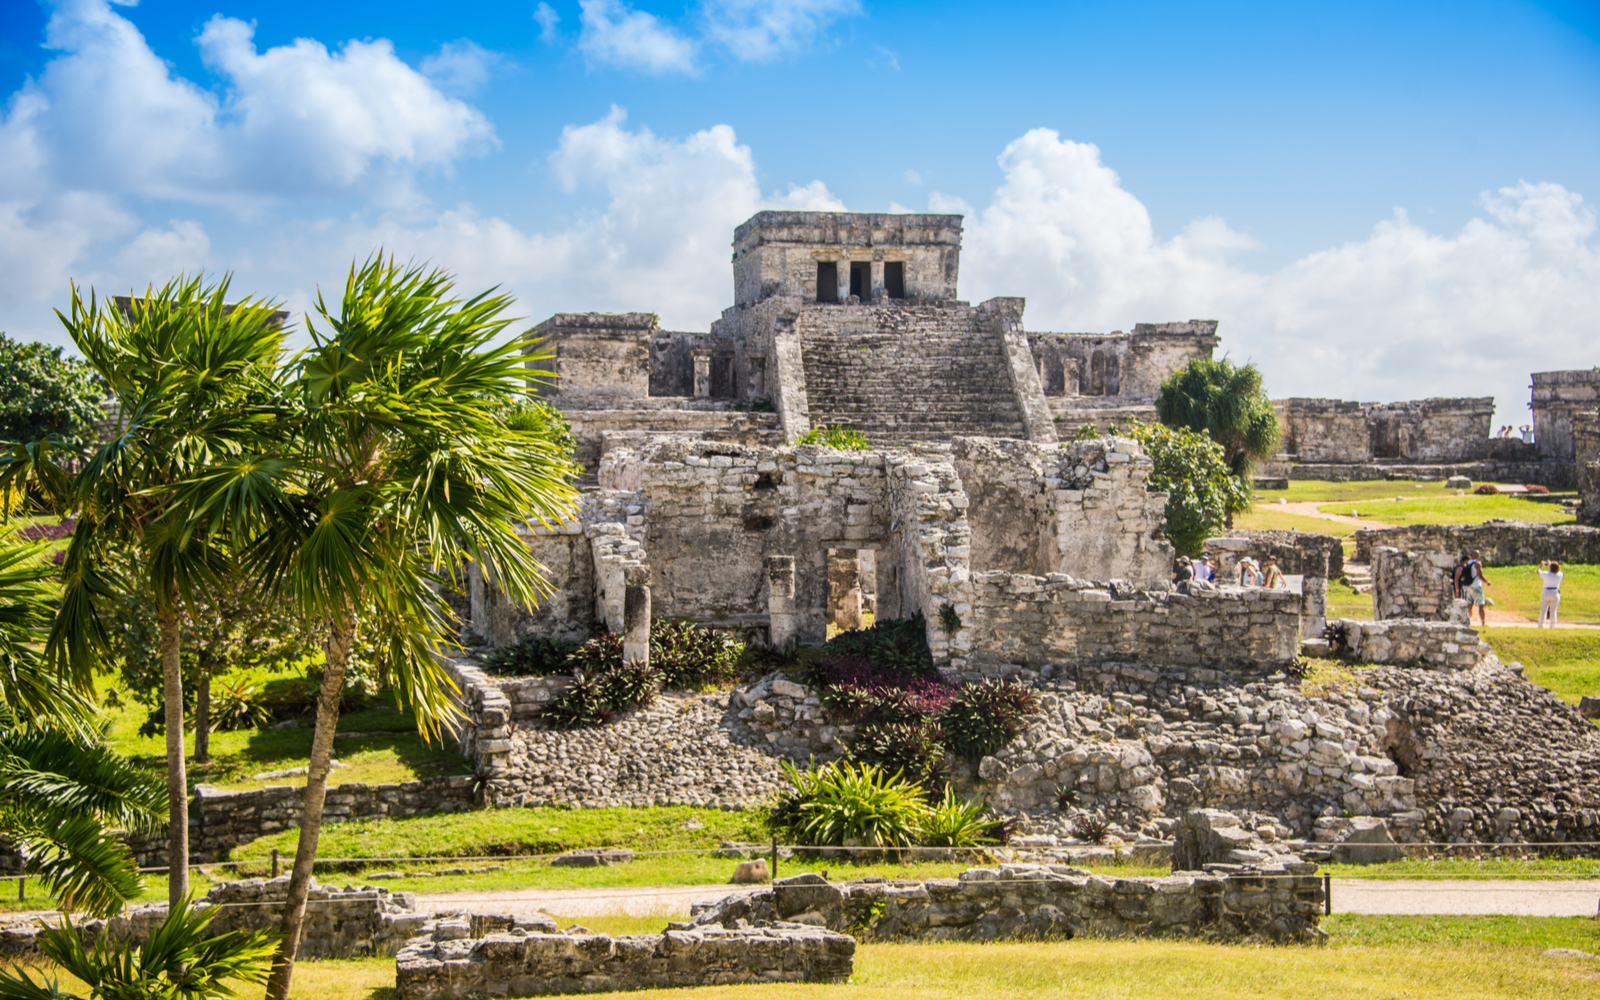 Ruins in the Riviera Maya, some of the best Mayan ruins in Mexico